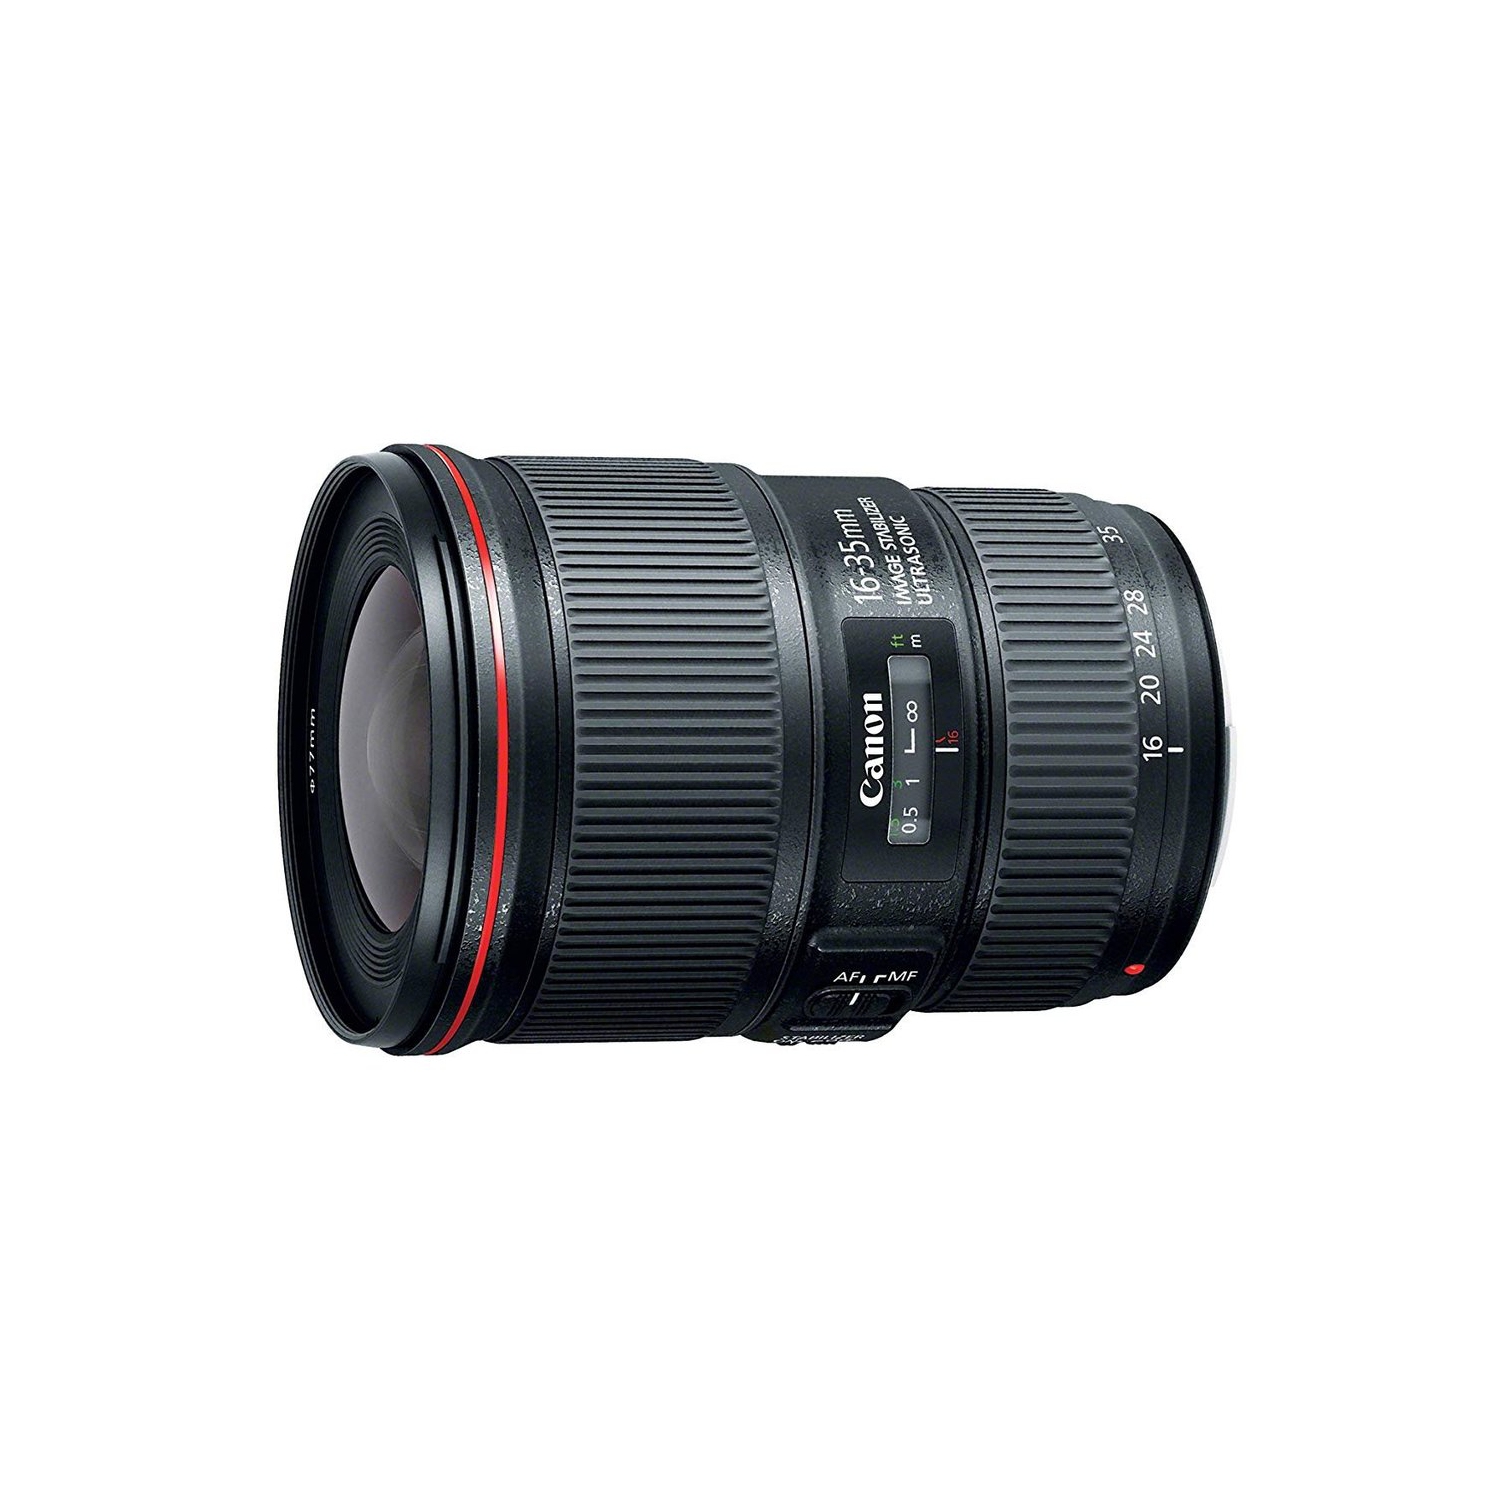 Canon EF 16-35mm f/4L IS USM Lens | Best Buy Canada